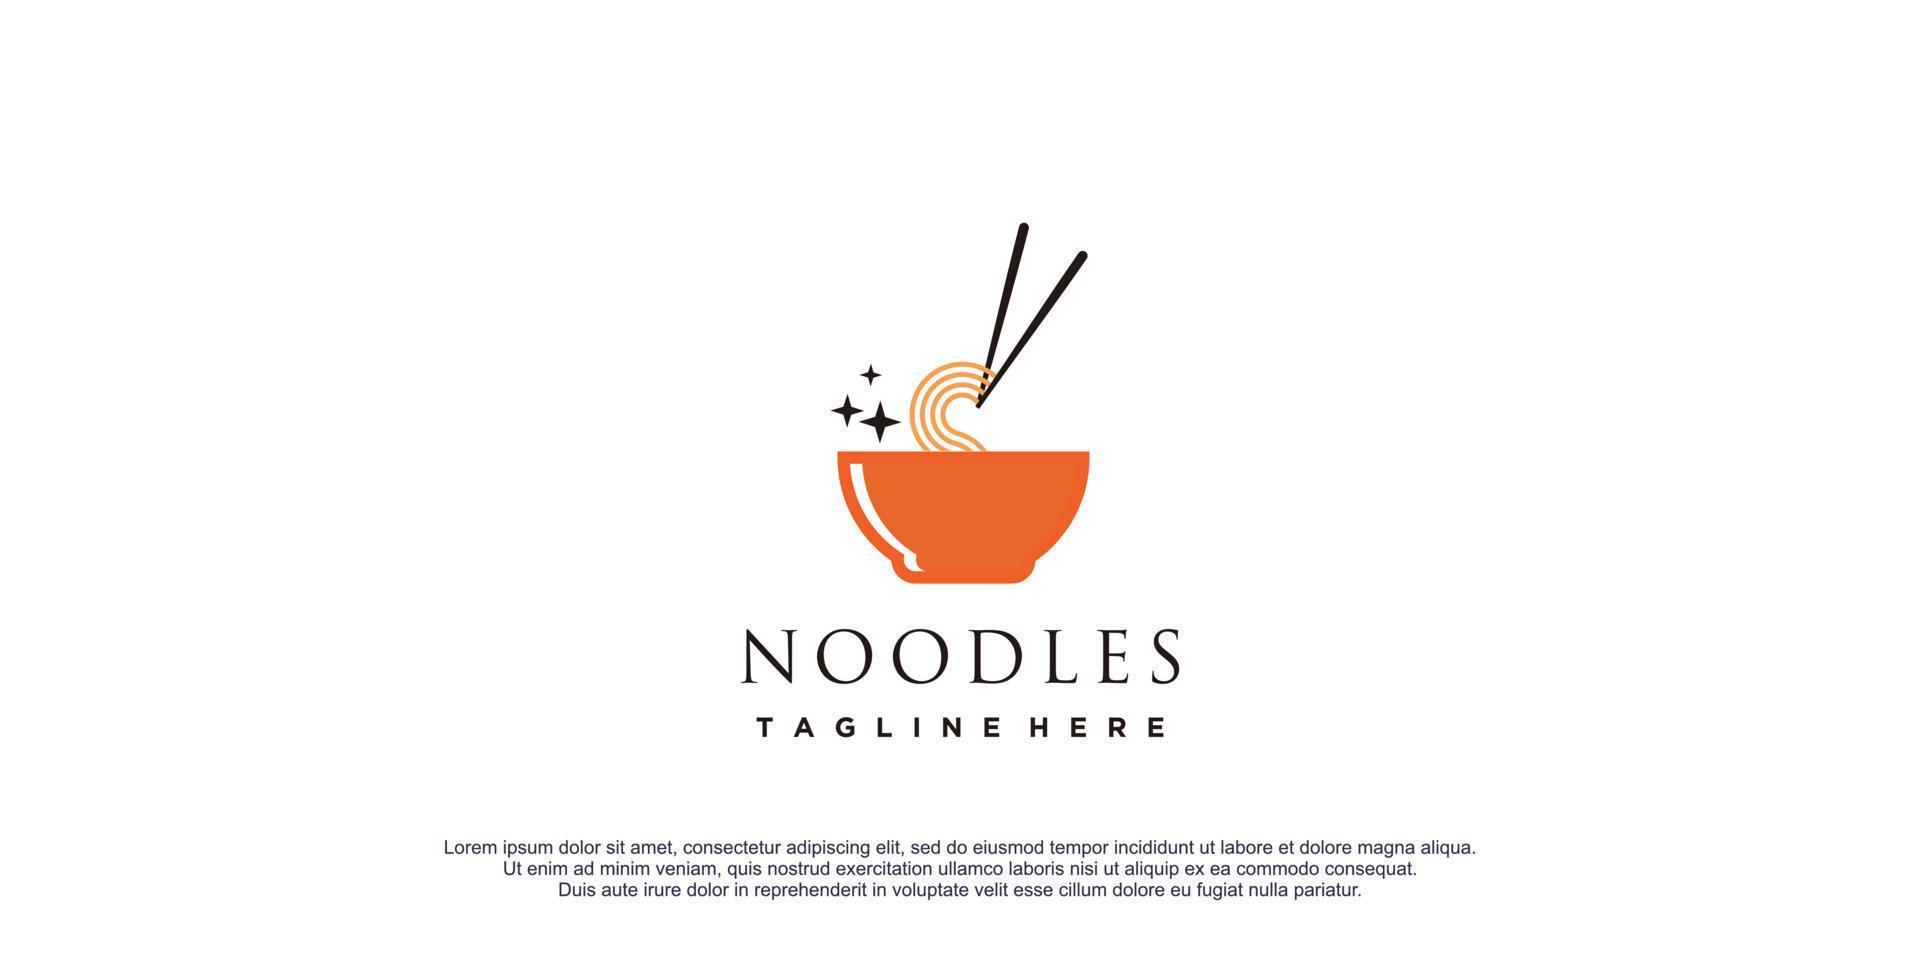 Noodles logo illustration with creative design icon template vector